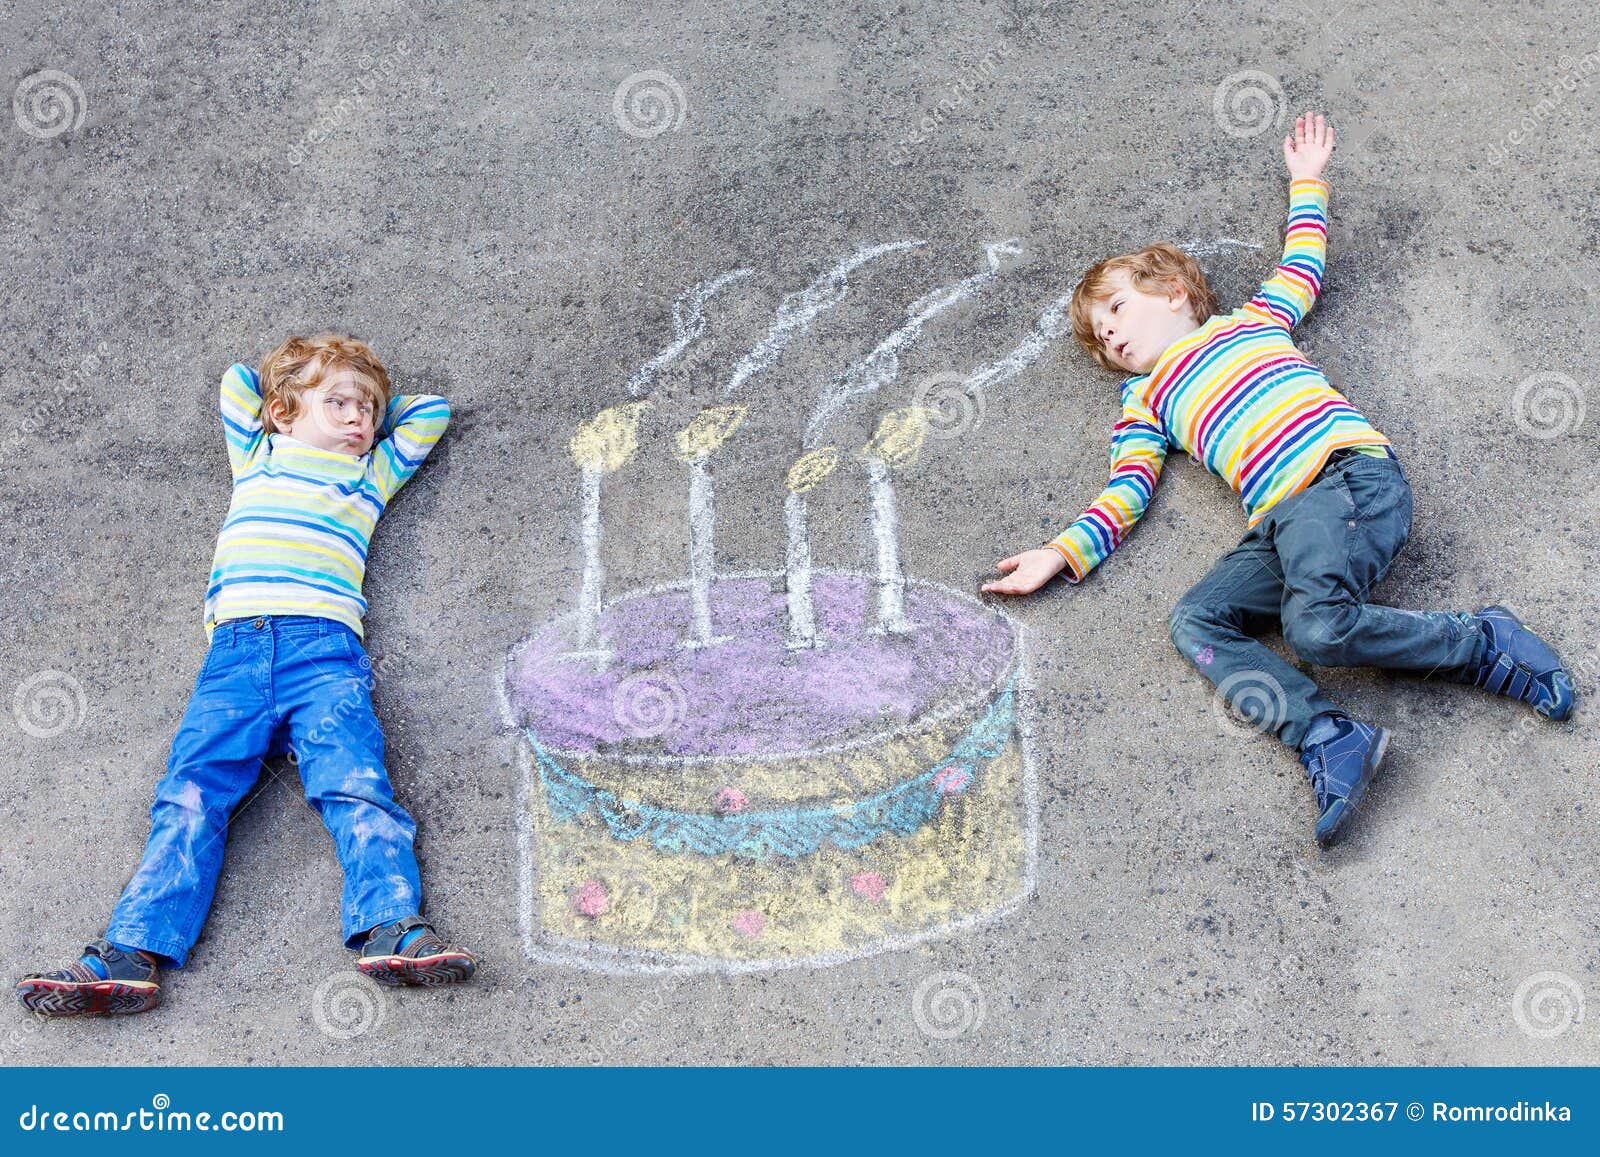 Birthday Cake coloring, dr | Kids coloring books, Colorful cakes, Cake  drawing-saigonsouth.com.vn